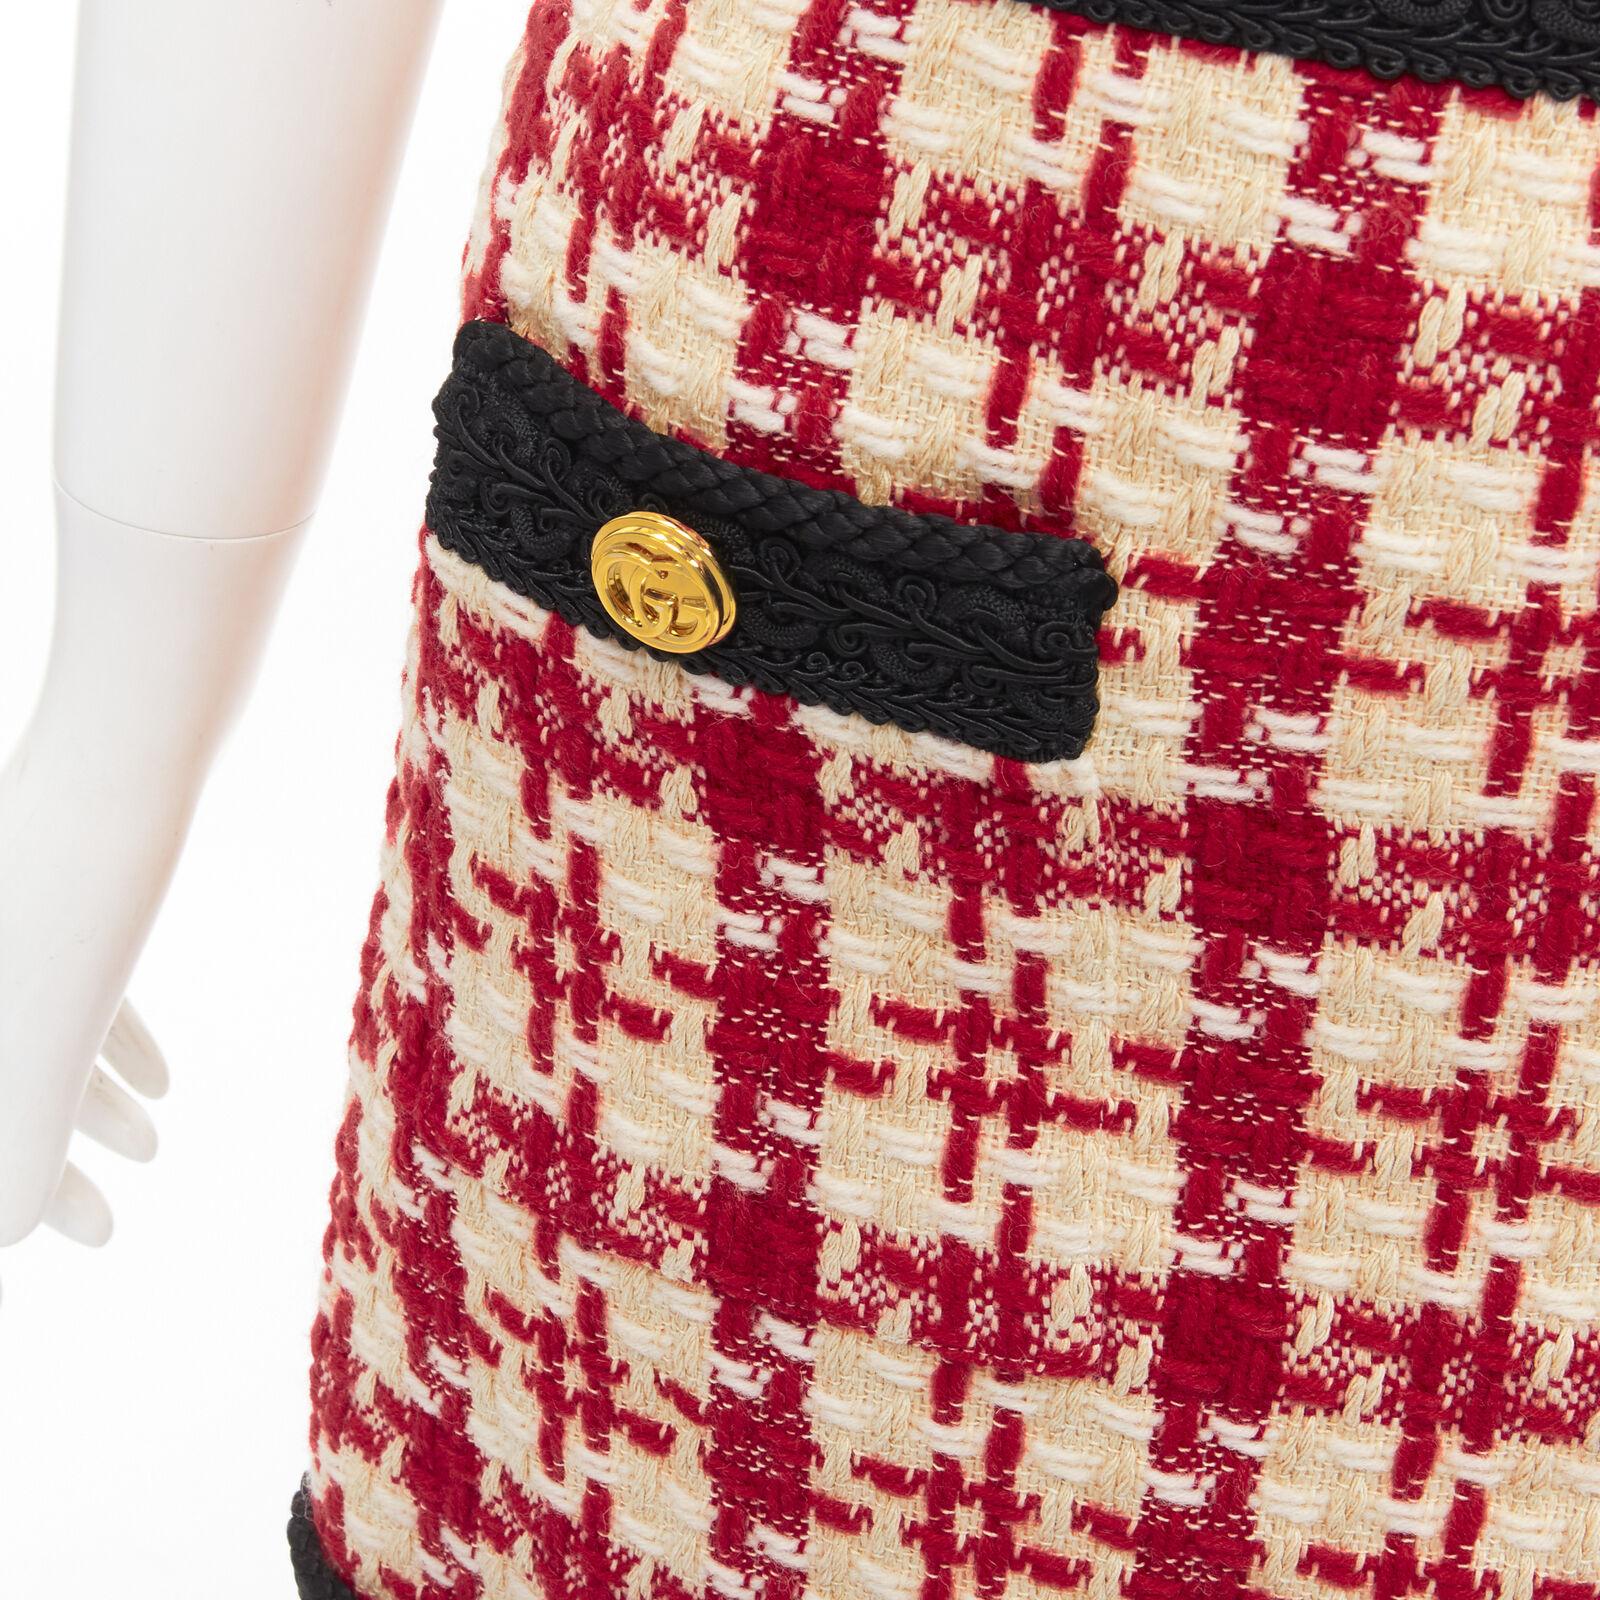 GUCCI red beige checkered tweed gold tone GG button mini skirt IT36 XXS
Reference: AAWC/A00375
Brand: Gucci
Designer: Alessandro Michele
Material: Acrylic, Wool
Color: Red, Multicolour
Pattern: Checkered
Closure: Zip
Lining: Fabric
Extra Details: GG